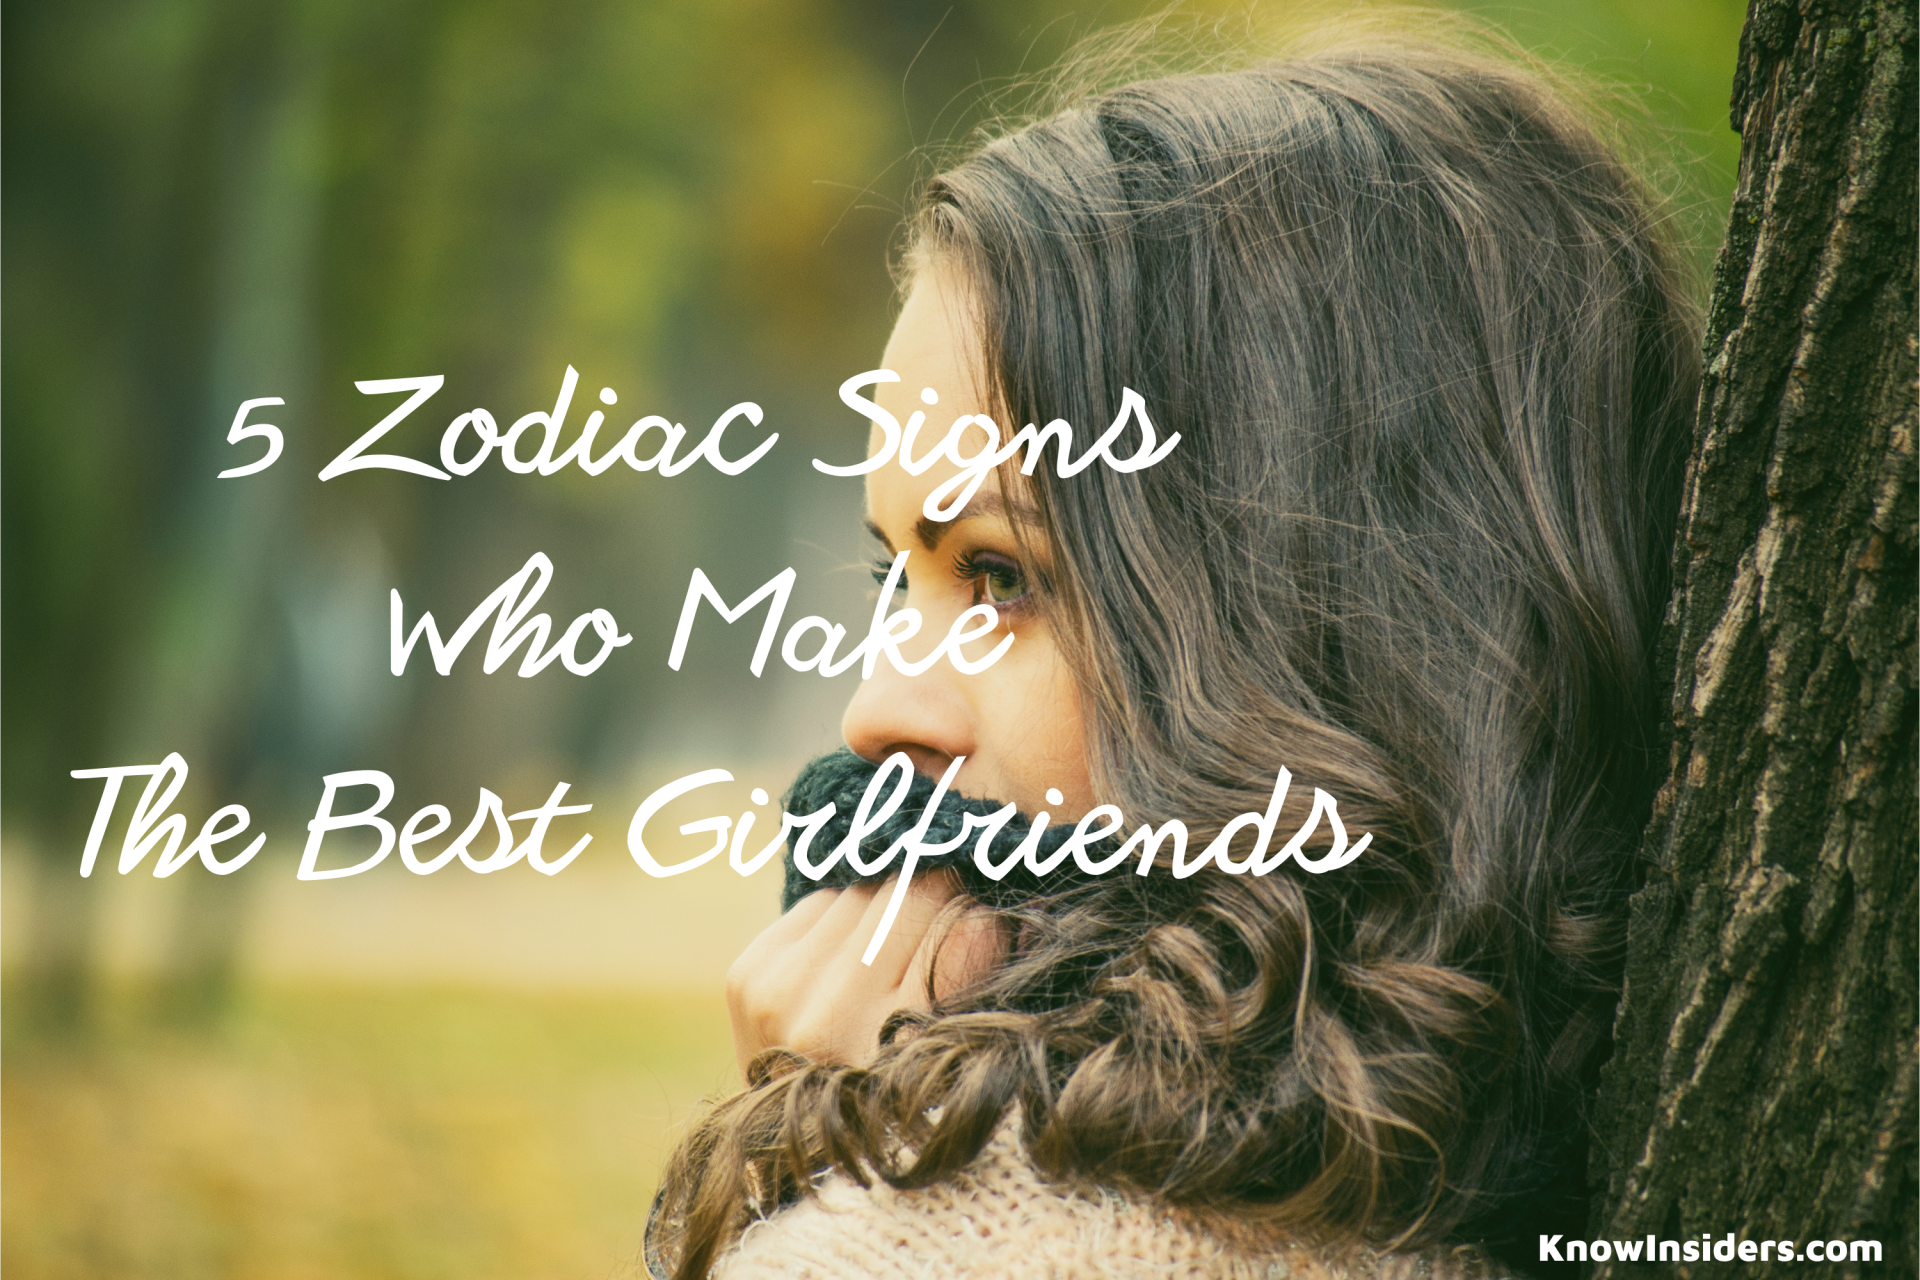 These 5 Zodiac Signs Who Are The Best Girlfriends - According to Astrology